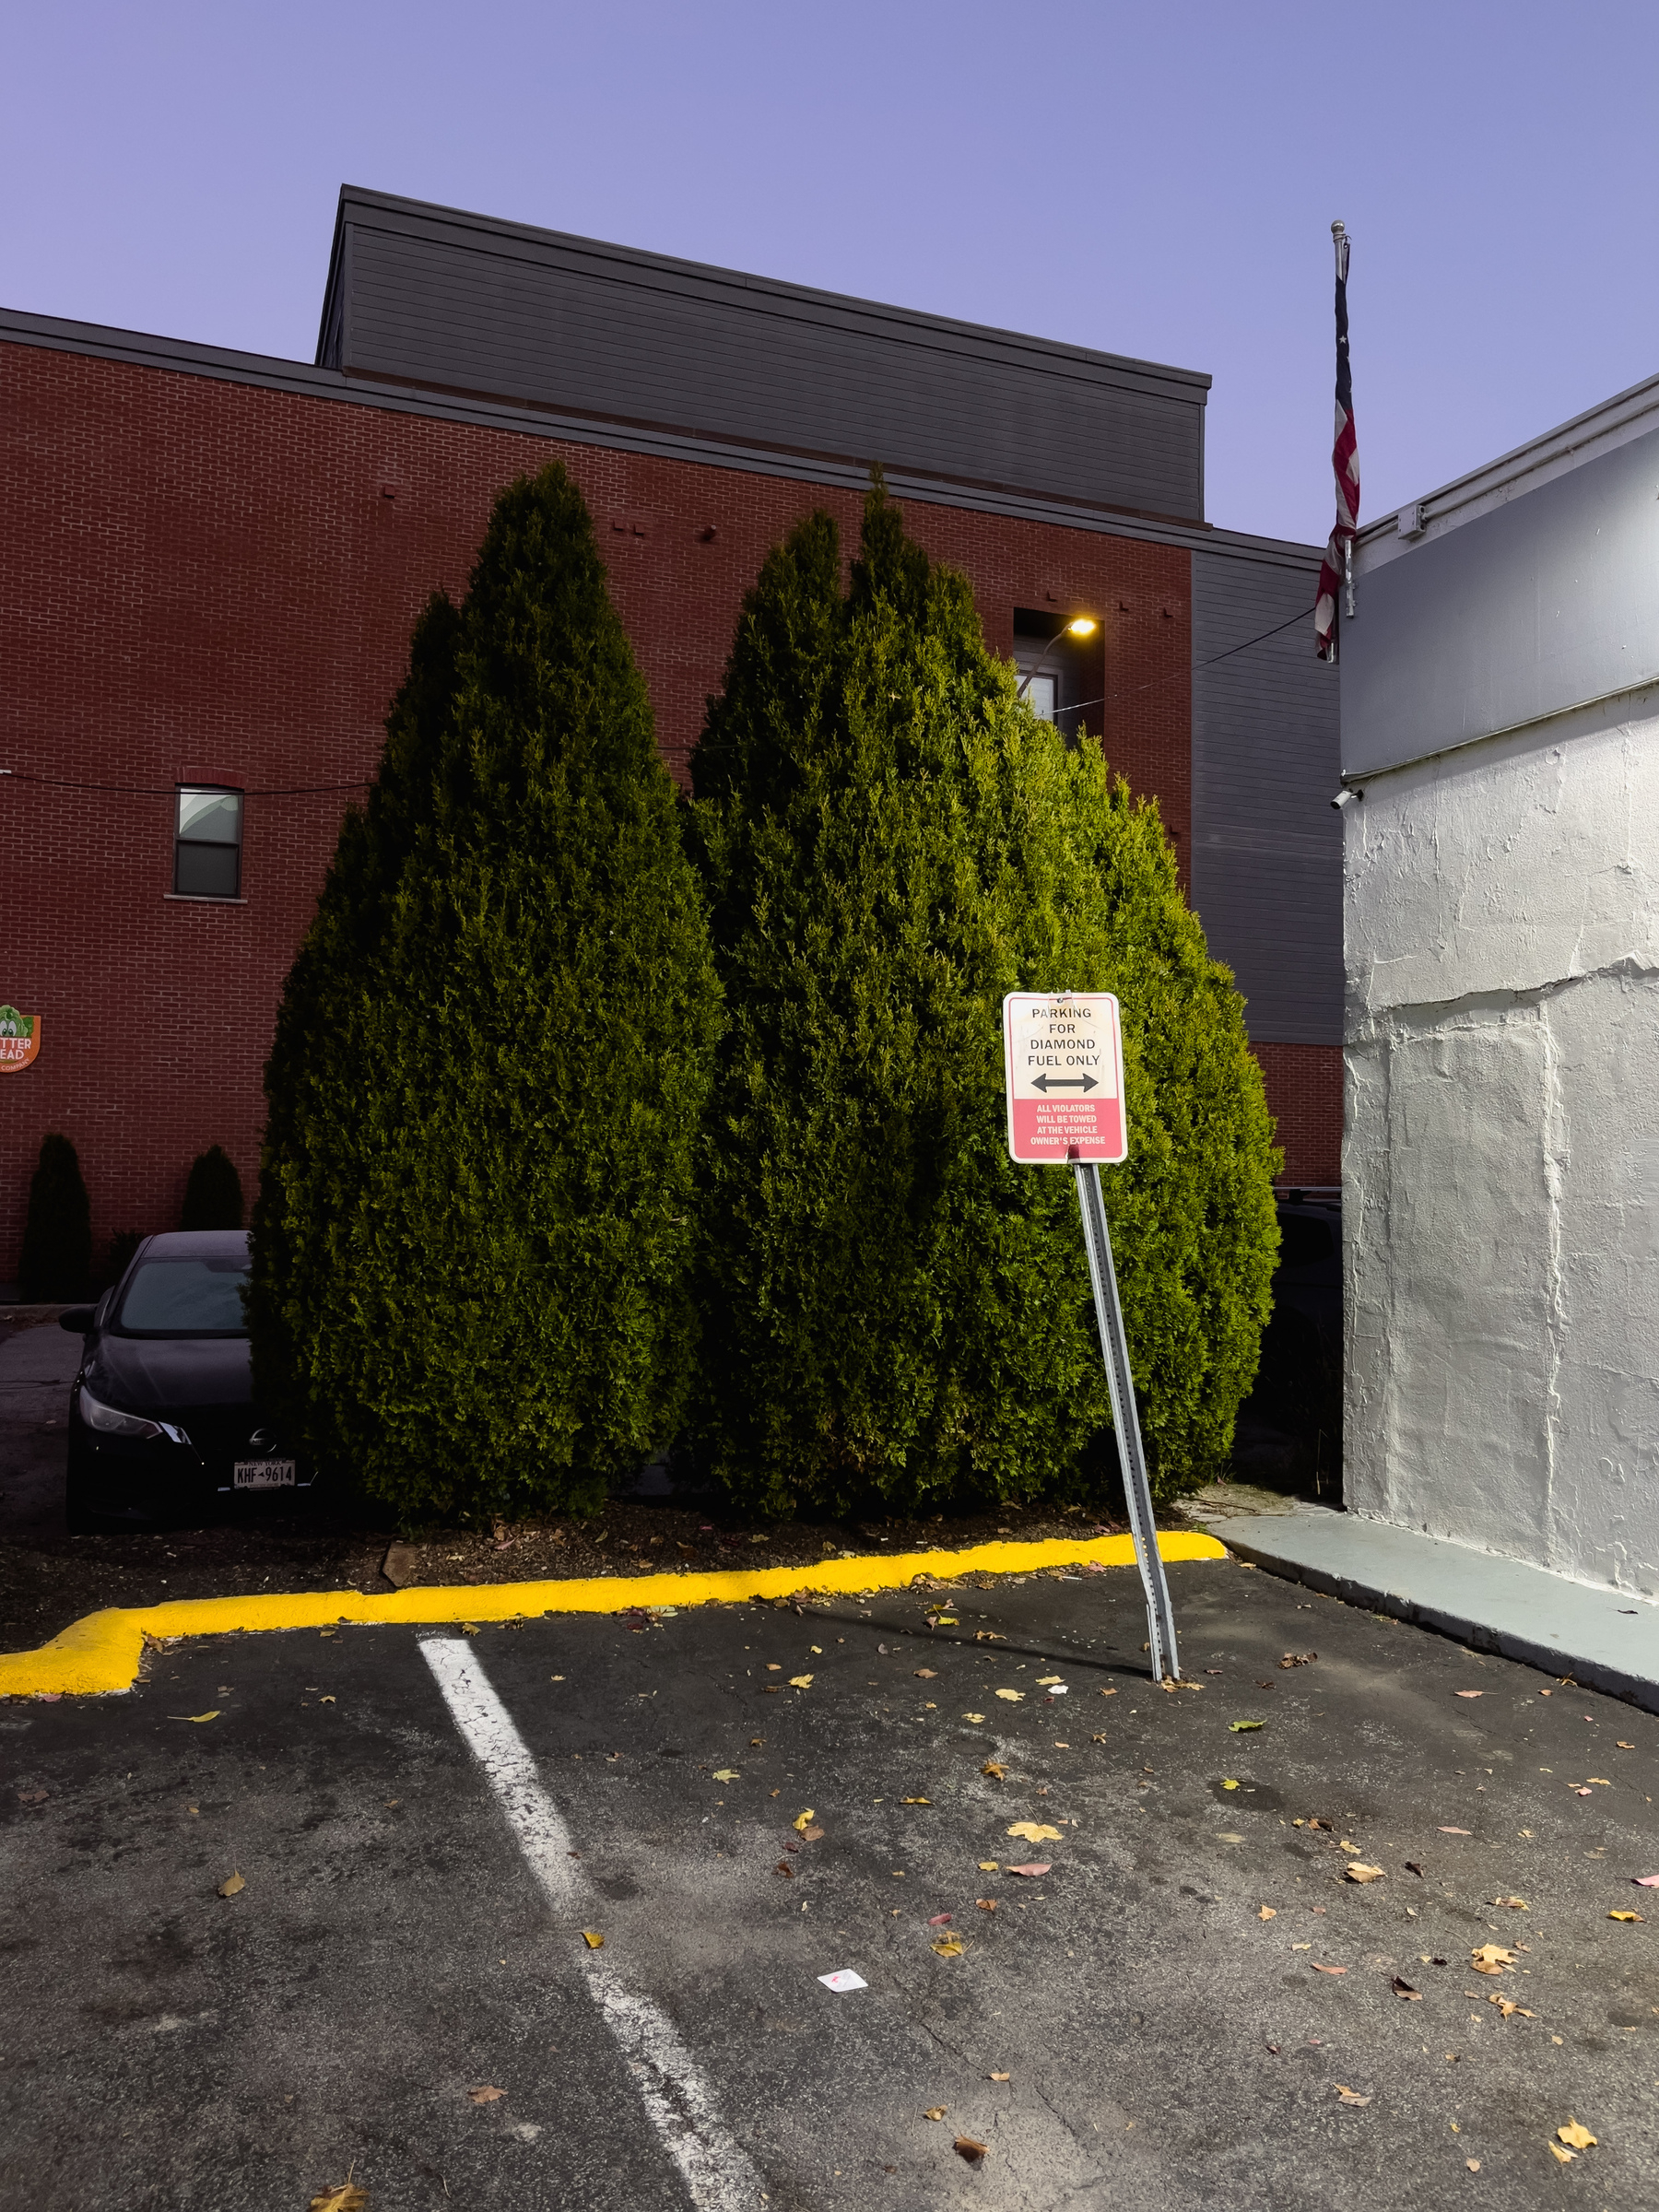 Corner of parking area framed by yellow painted curb, wall of building on right, two evergreen shrubs in middle, with signage on a post providing information about the parking spaces.